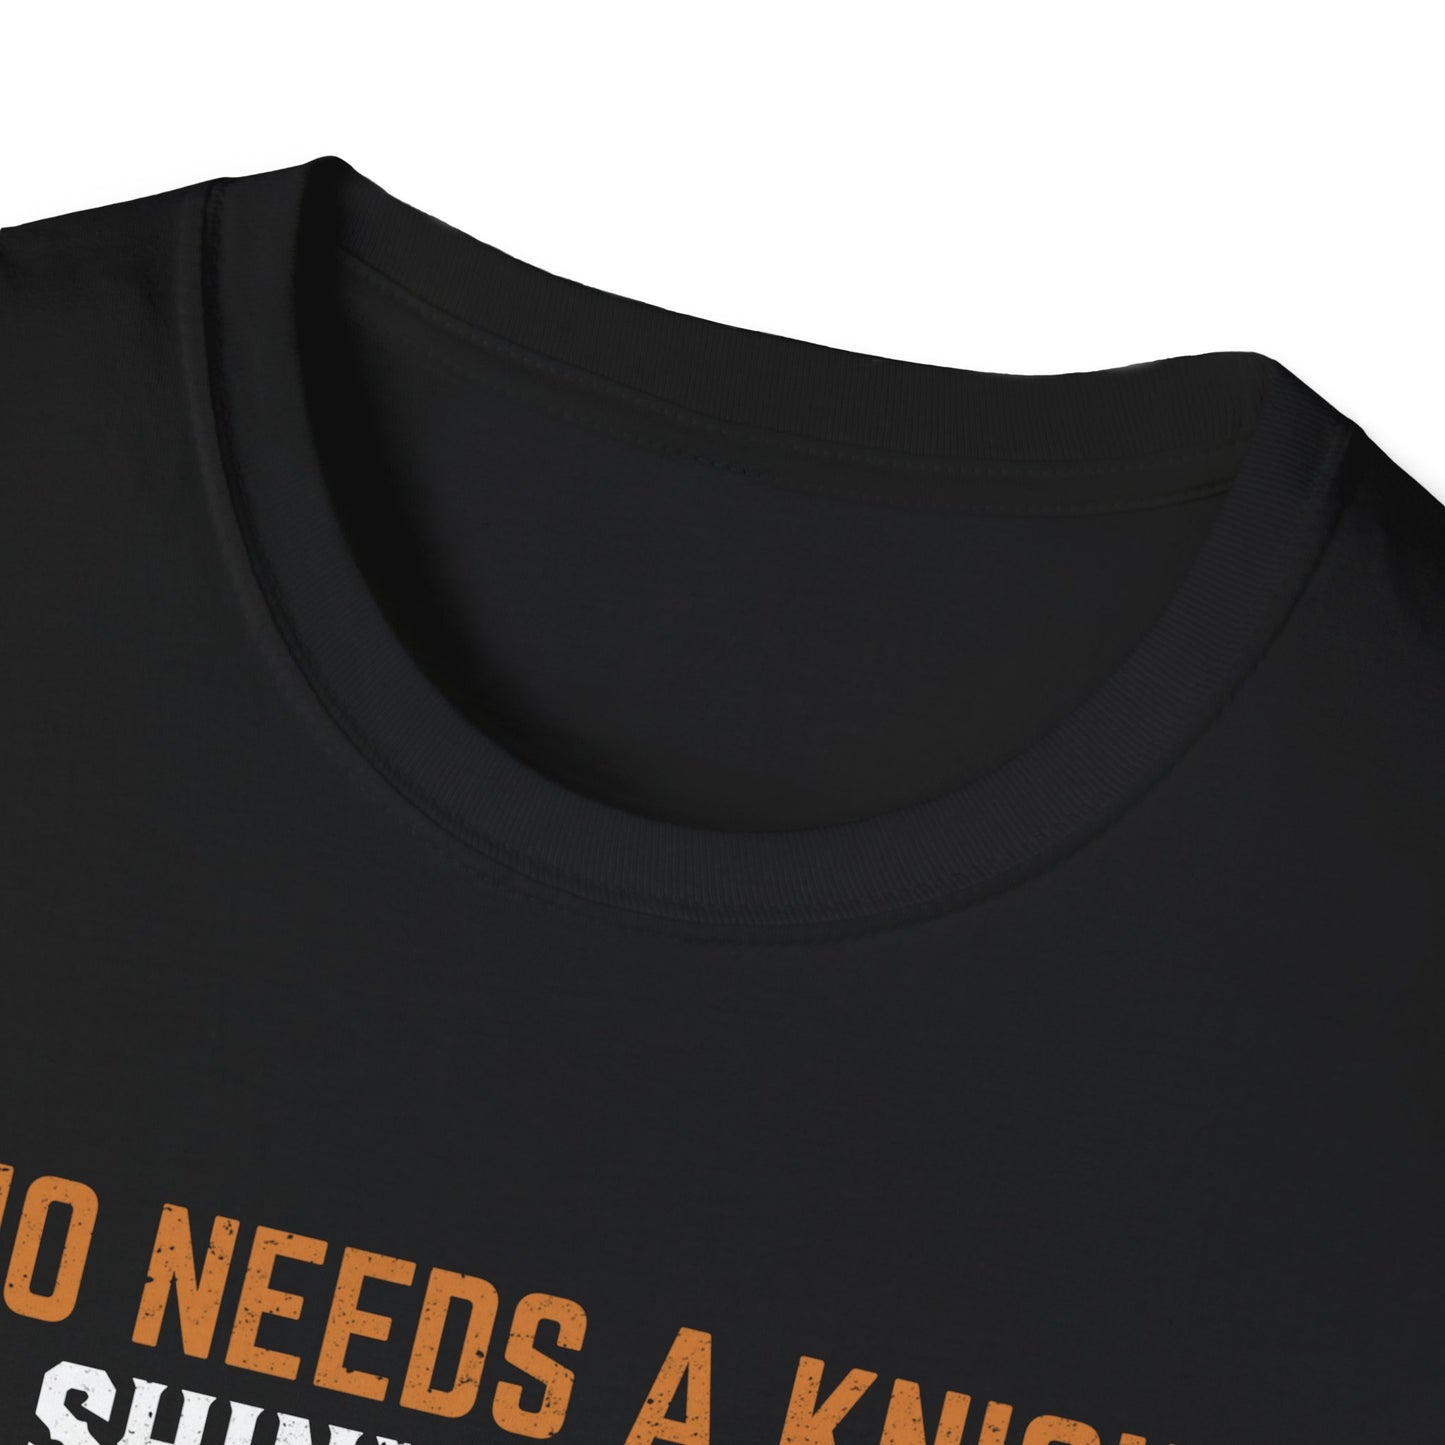 Who Needs A Knight In Shining Armor T-Shirt